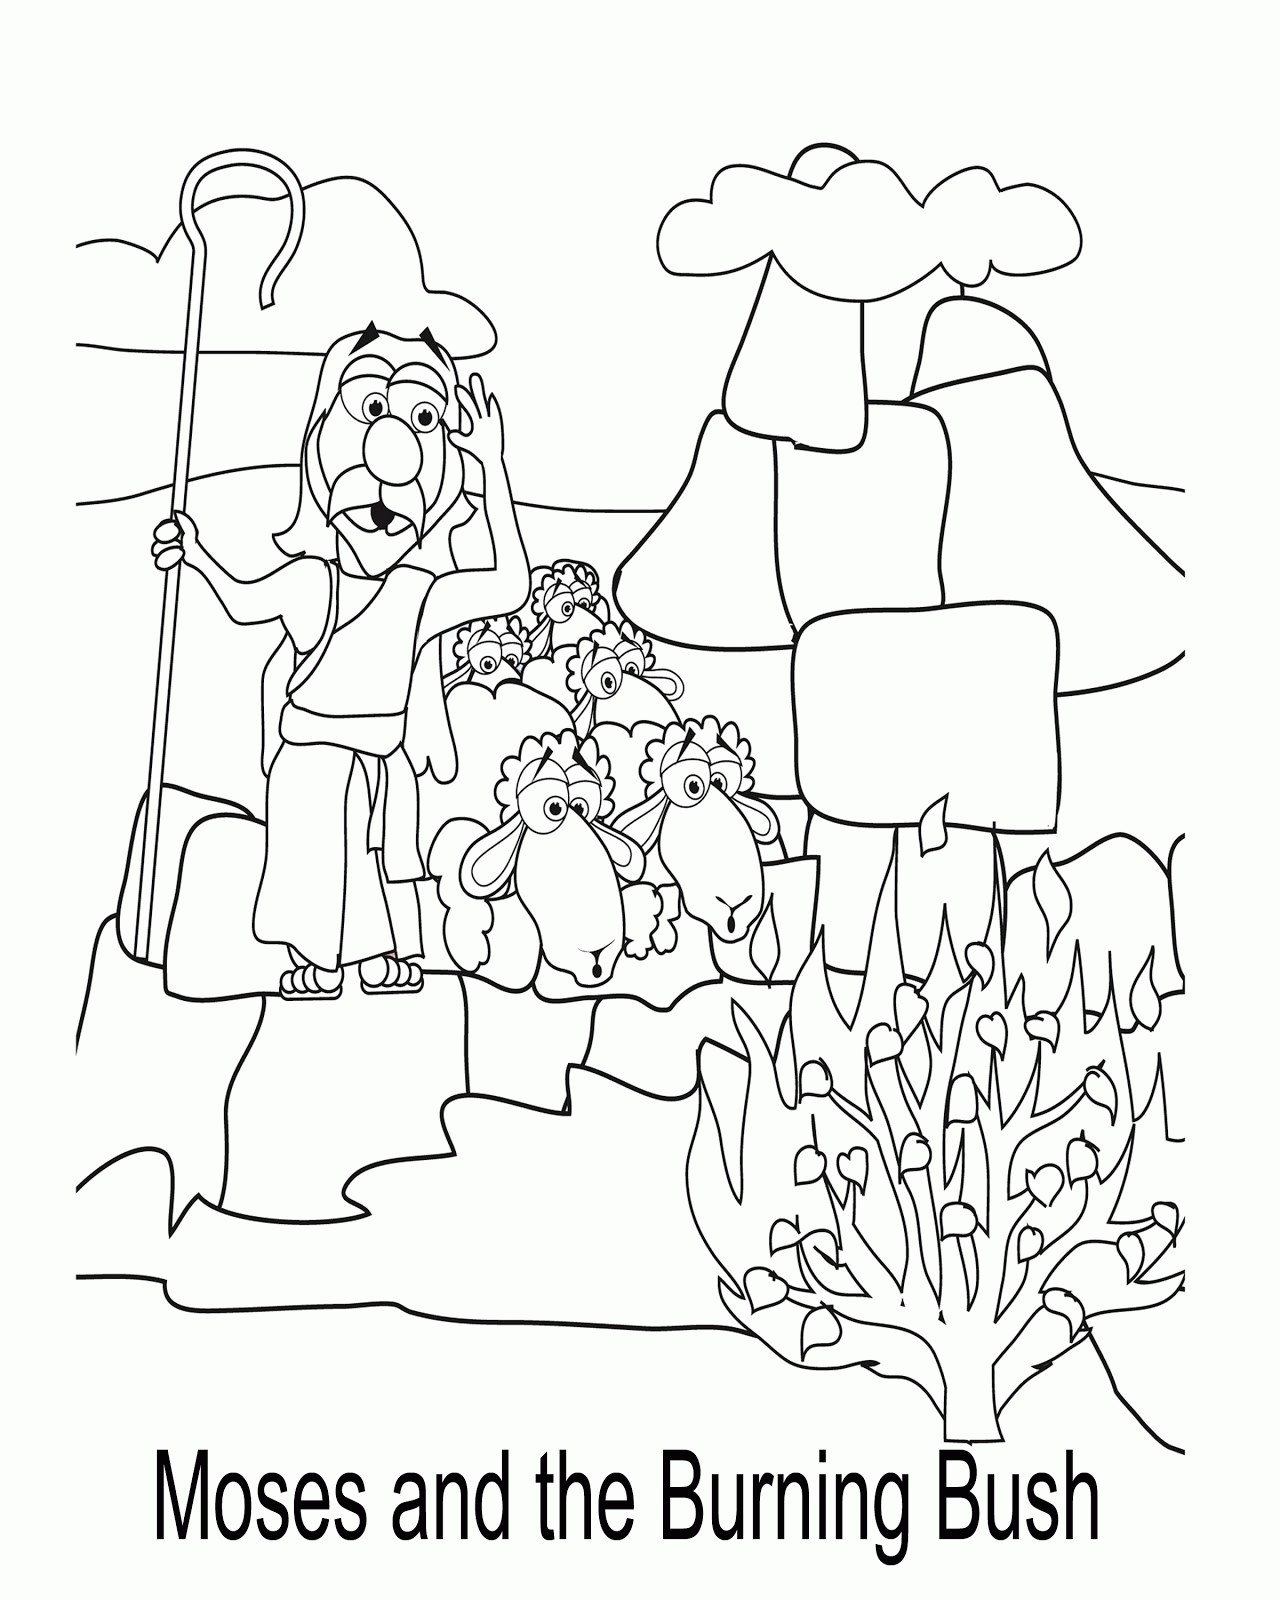 Crossing The Jordan Coloring Page - Coloring Pages for Kids and ...